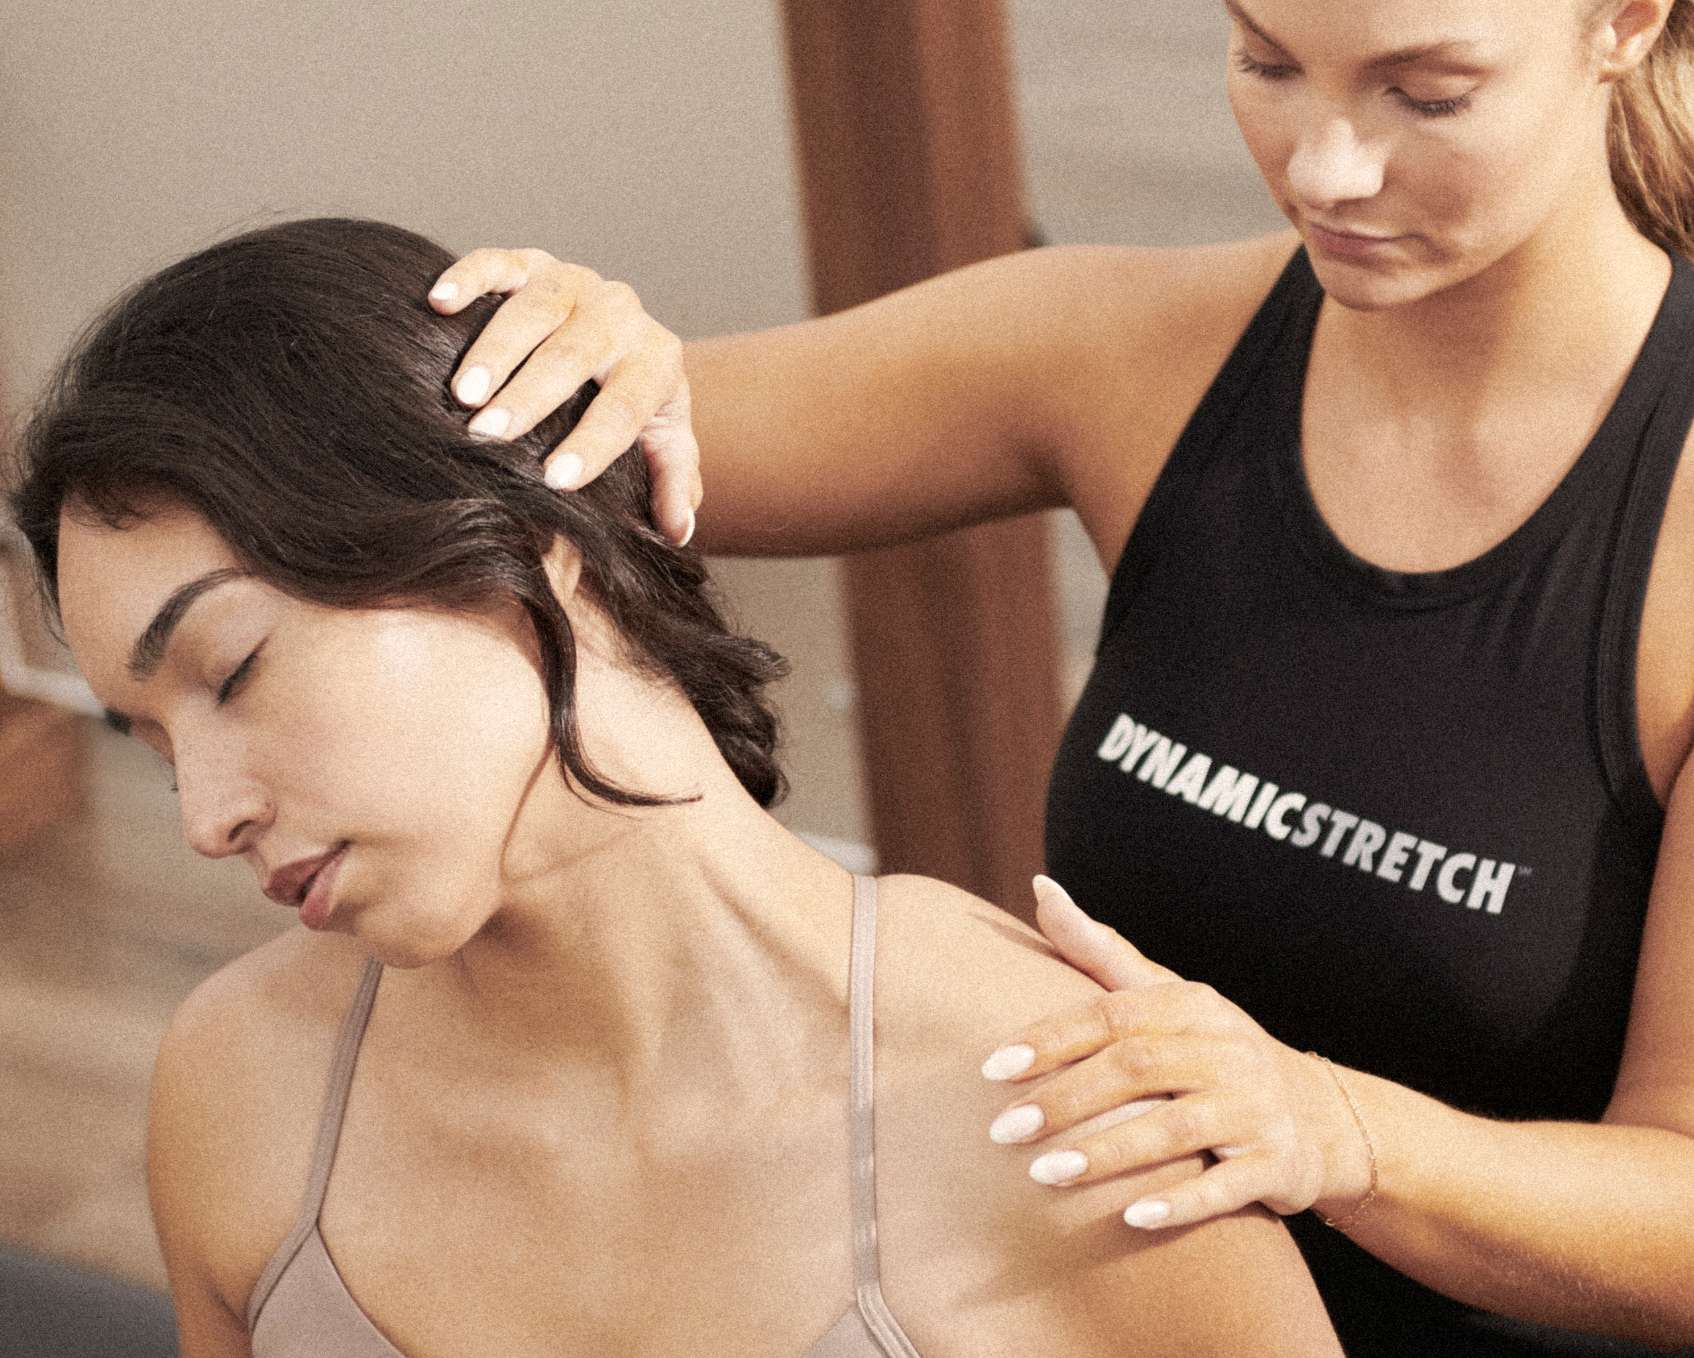 A woman getting her neck stretched by a trainer